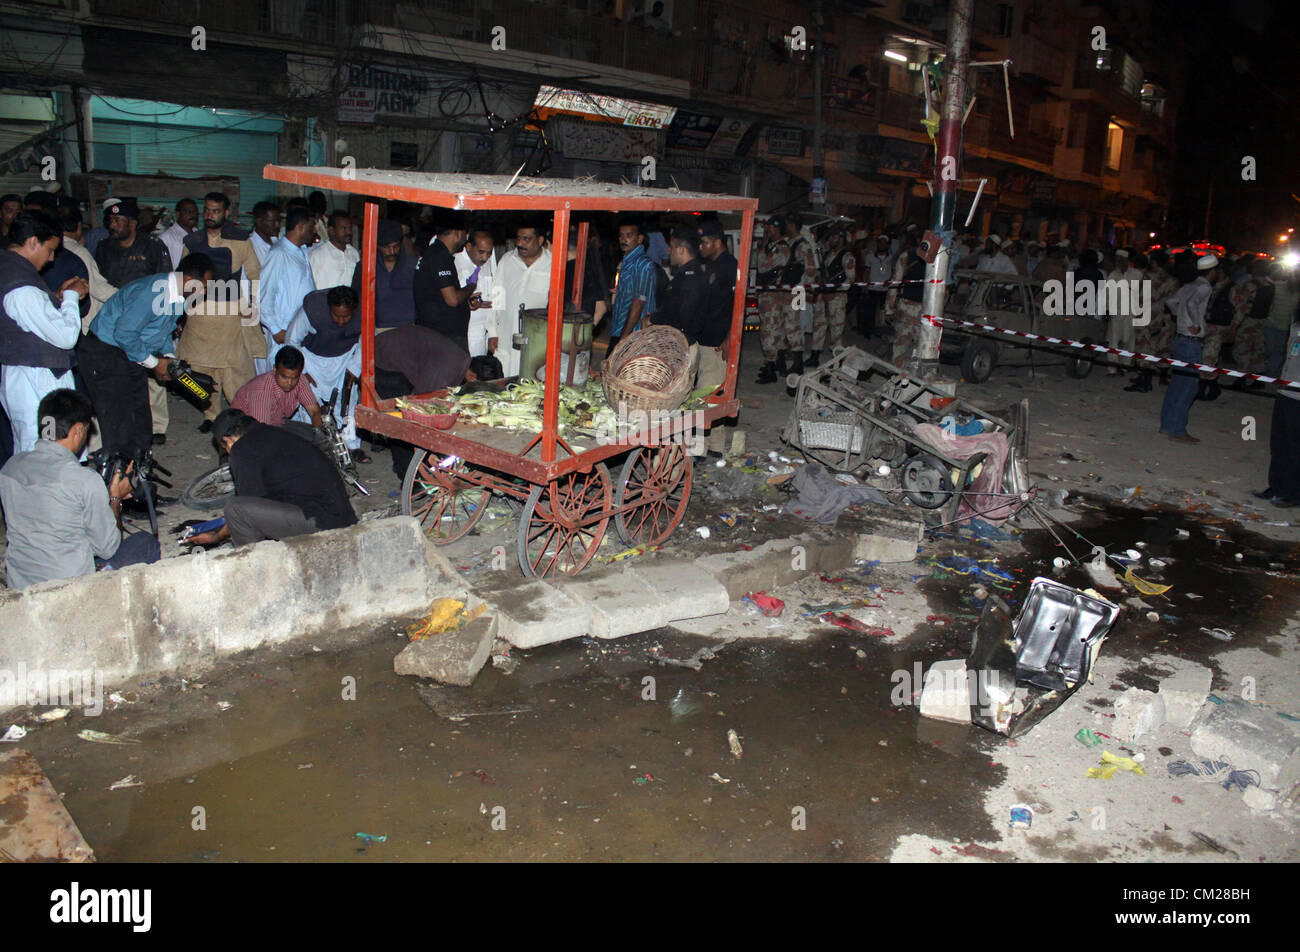 Karachi, Pakistan. 18th September, 2012. Police officials examine the site of a blast near Bohri Muslims' residence and  Community Centre in Karachi September 18, 2012. At least 8 people were killed while several others were injured when two planted bombs exploded. Stock Photo